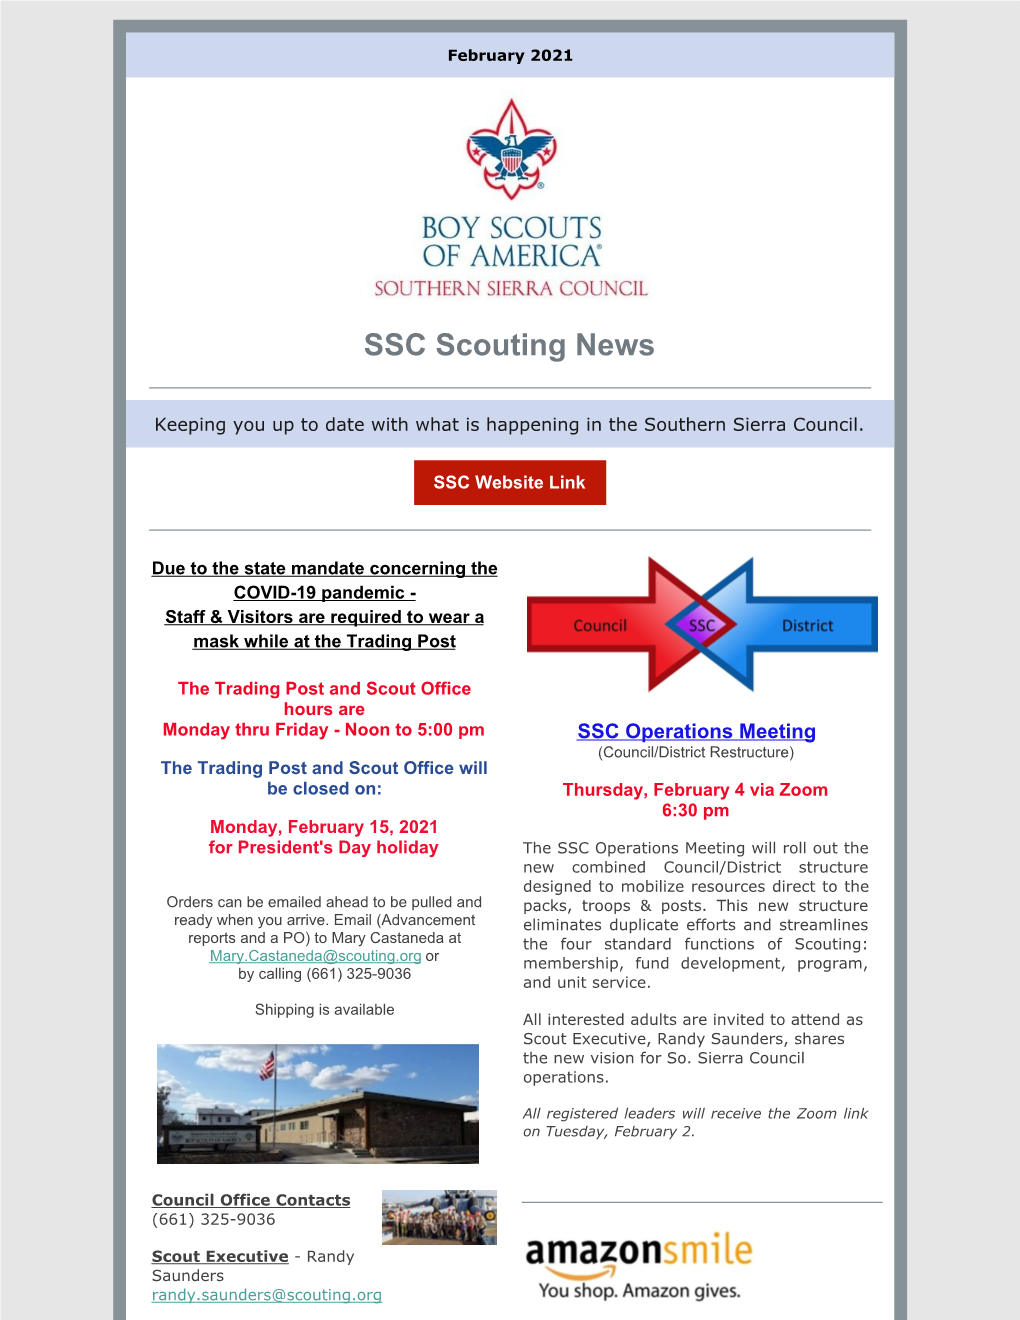 SSC Scouting News